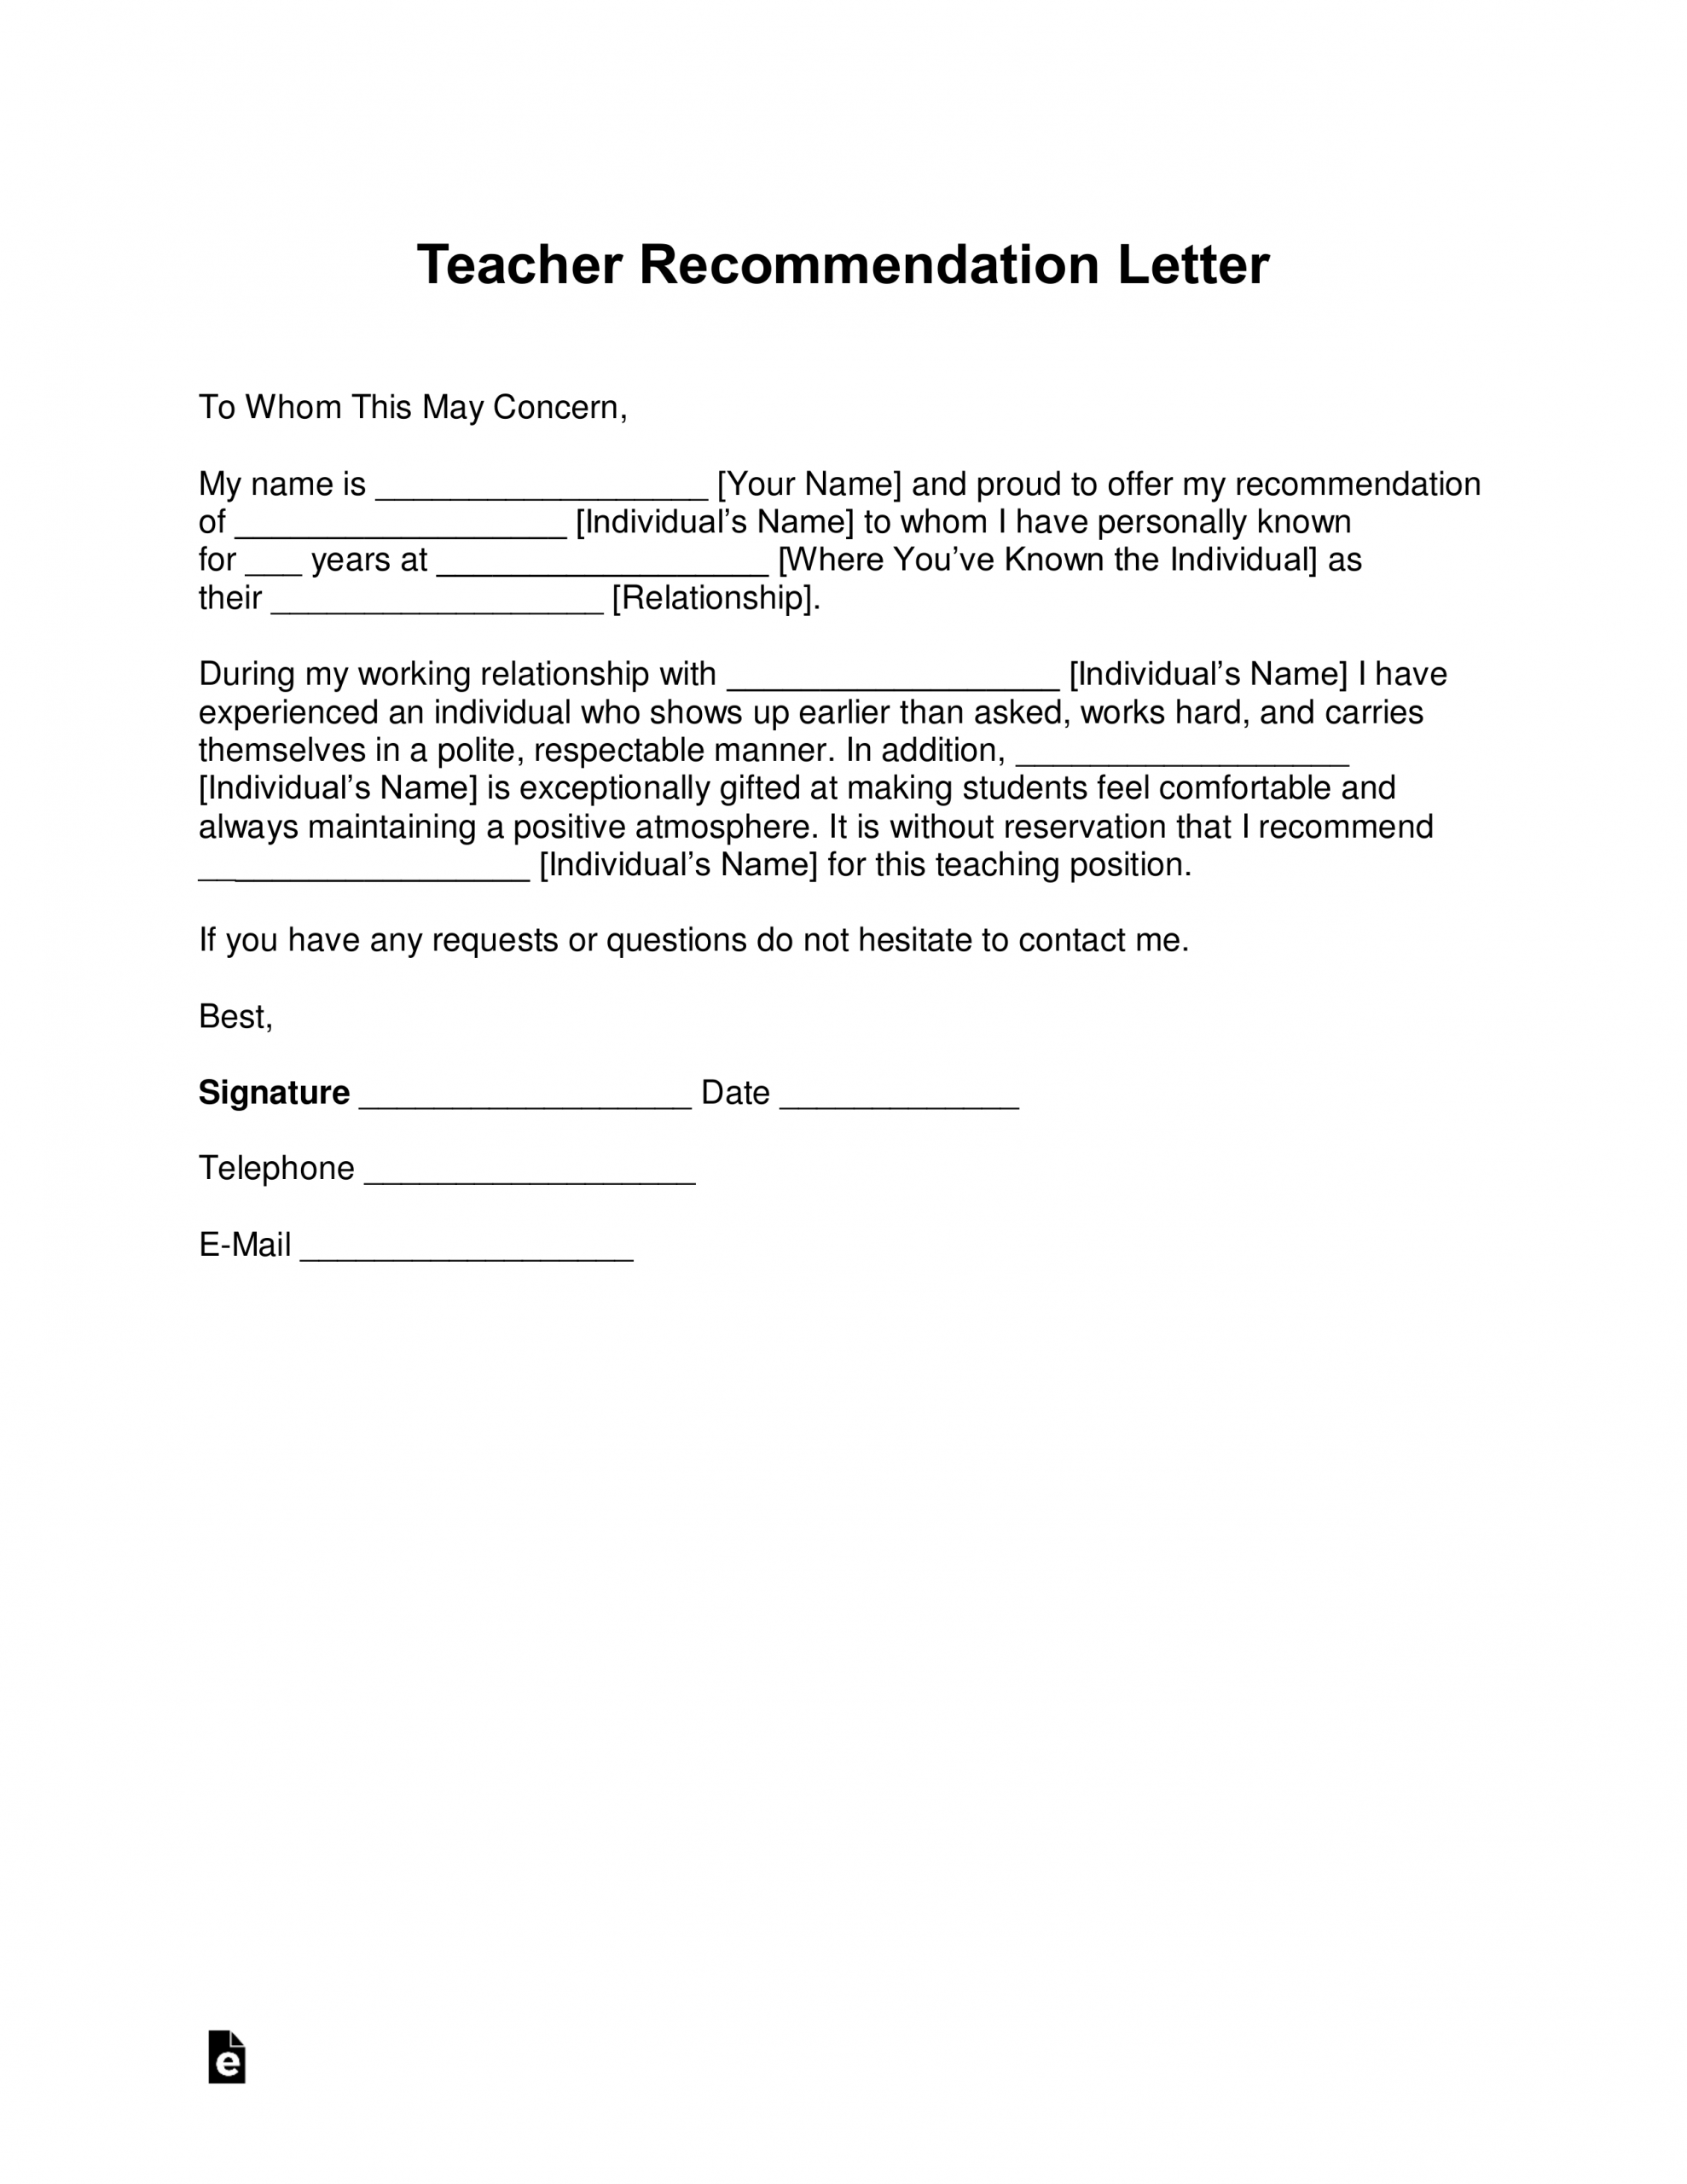 Free Teacher Recommendation Letter Template With Samples for size 2550 X 3301